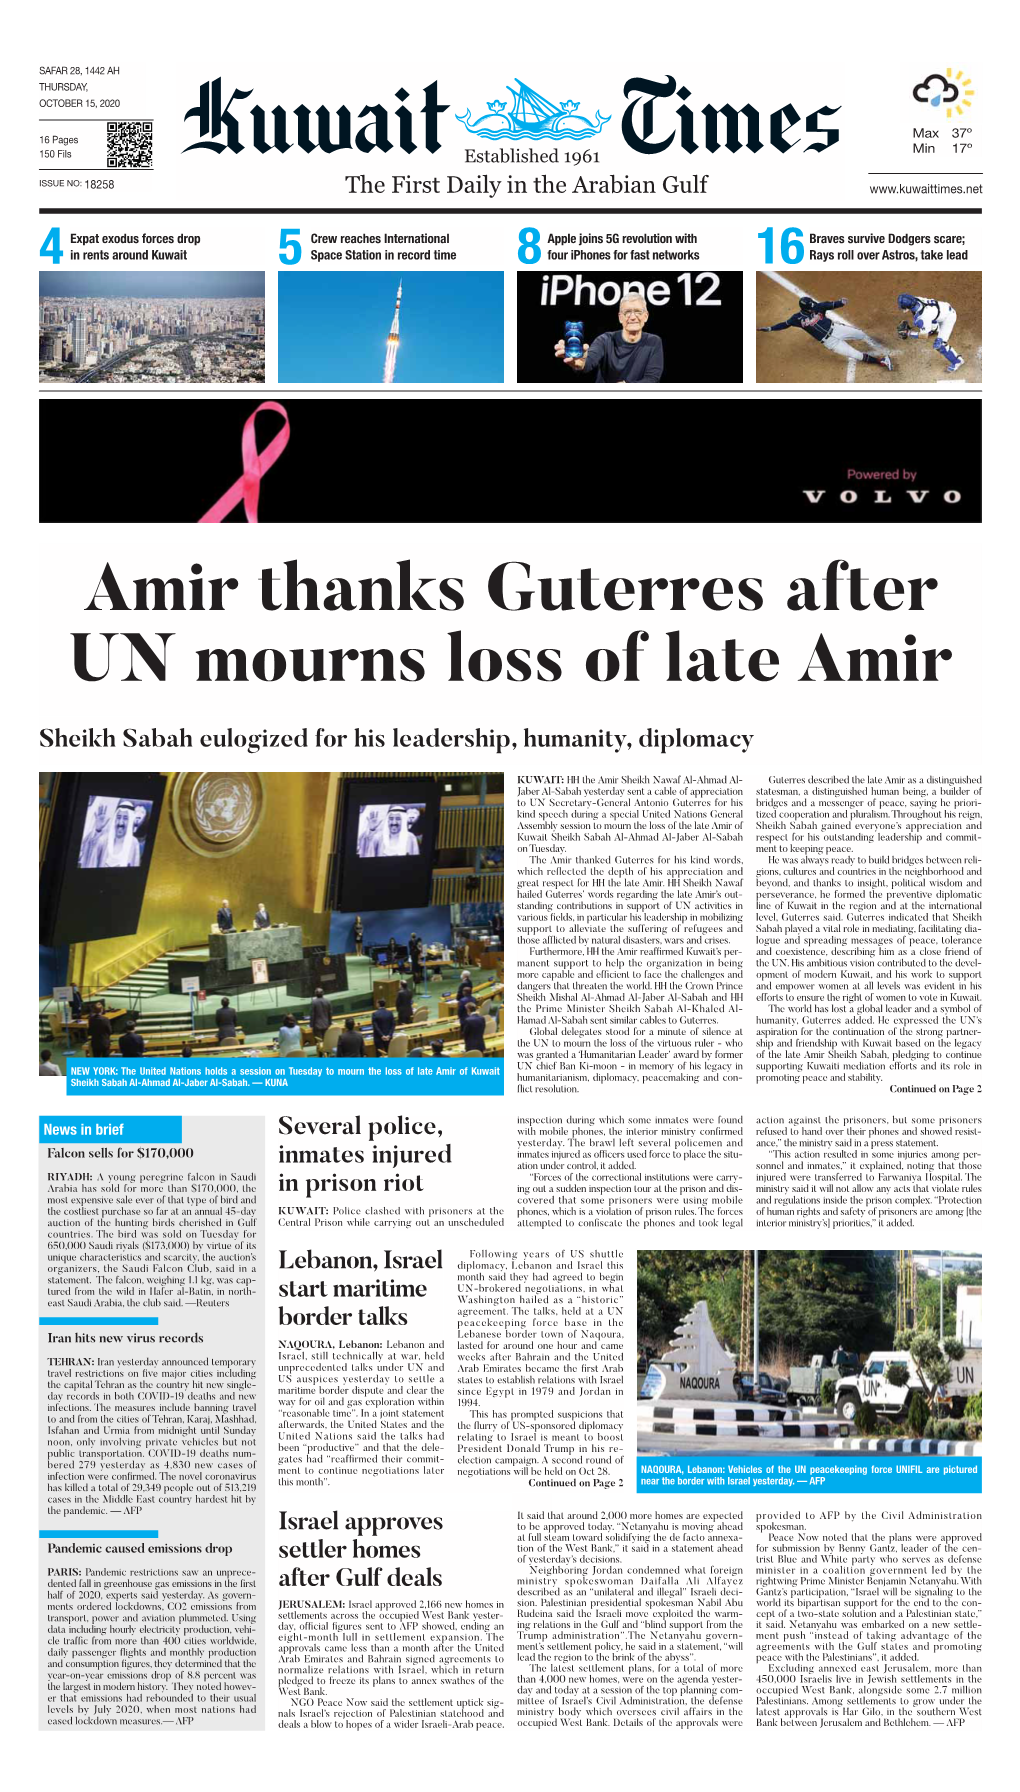 Amir Thanks Guterres After UN Mourns Loss of Late Amir